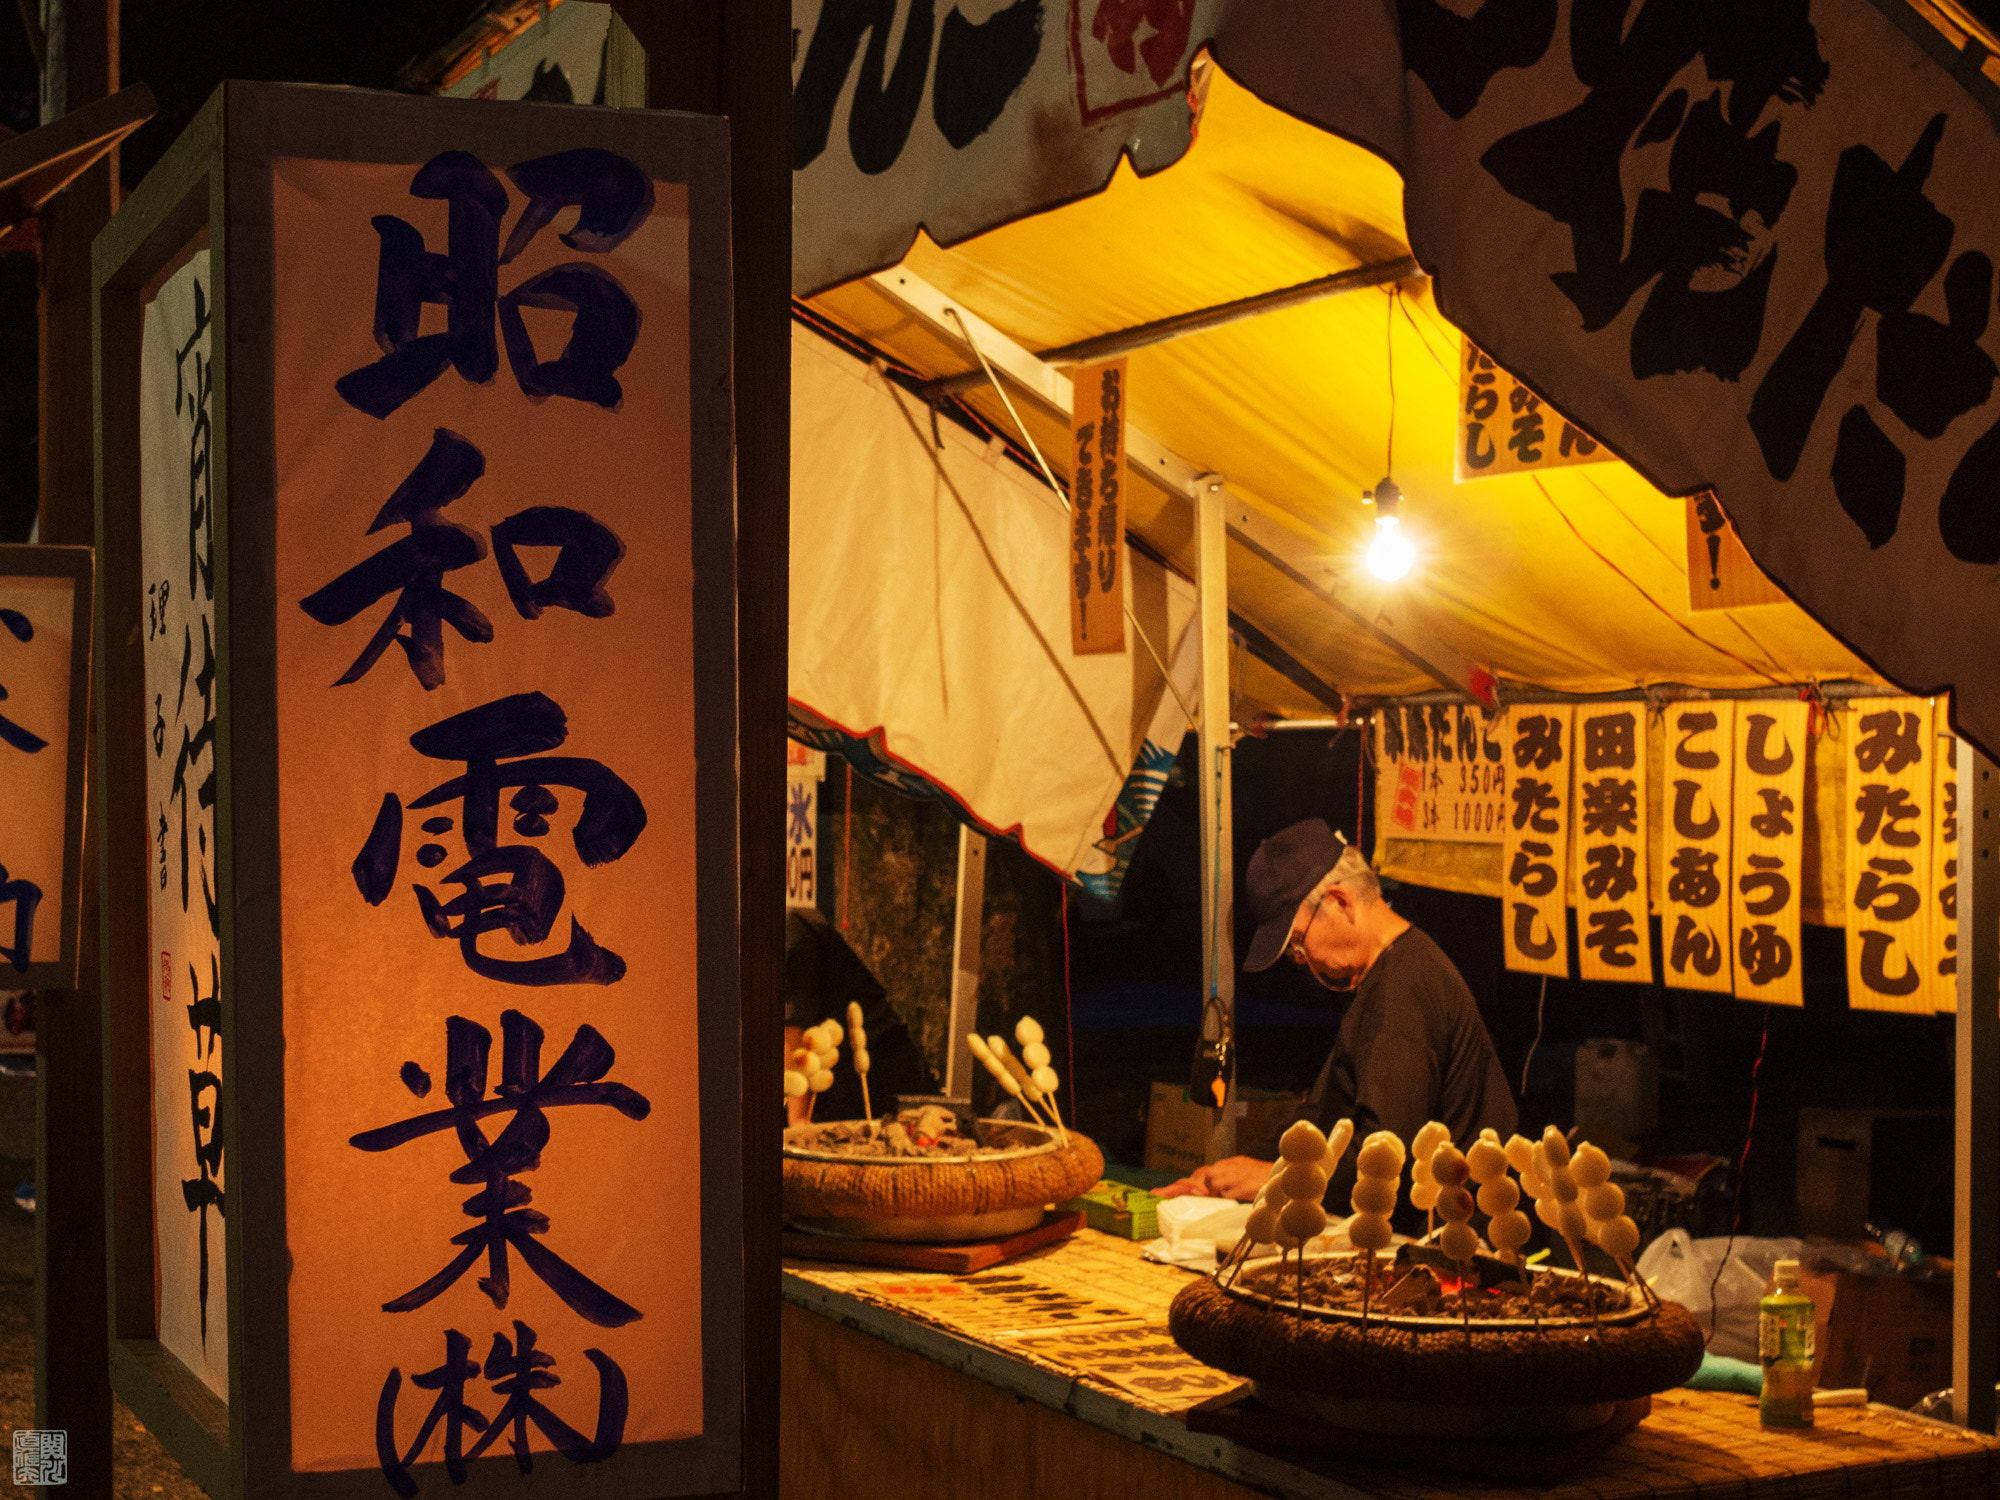 Olympus OM-D E-M10 II sample photo. Food booth “yatai” at night festival photography